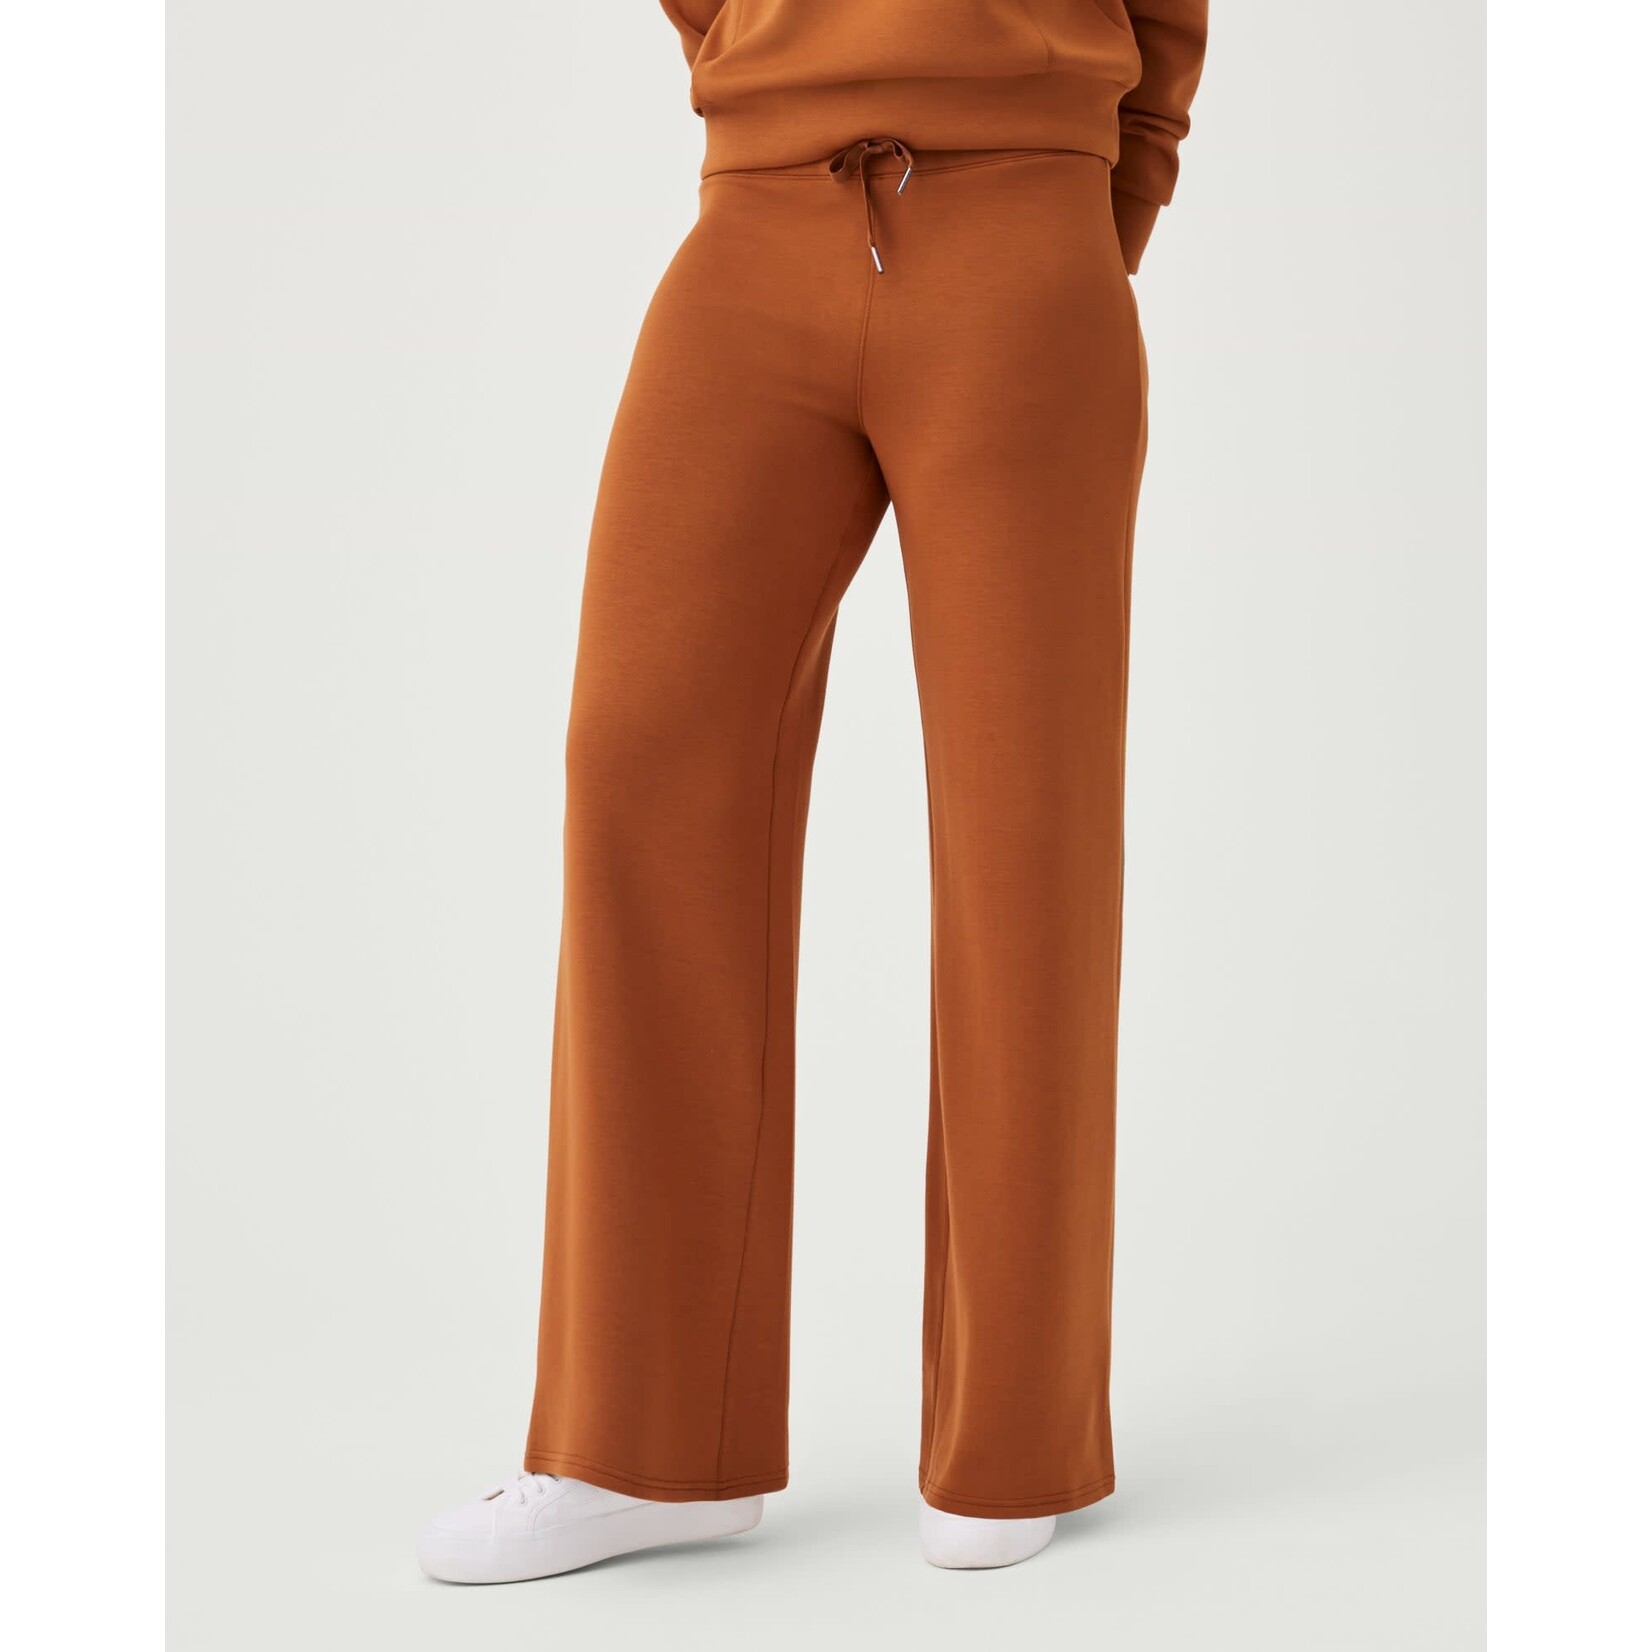 Spanx airessentials wide leg pant